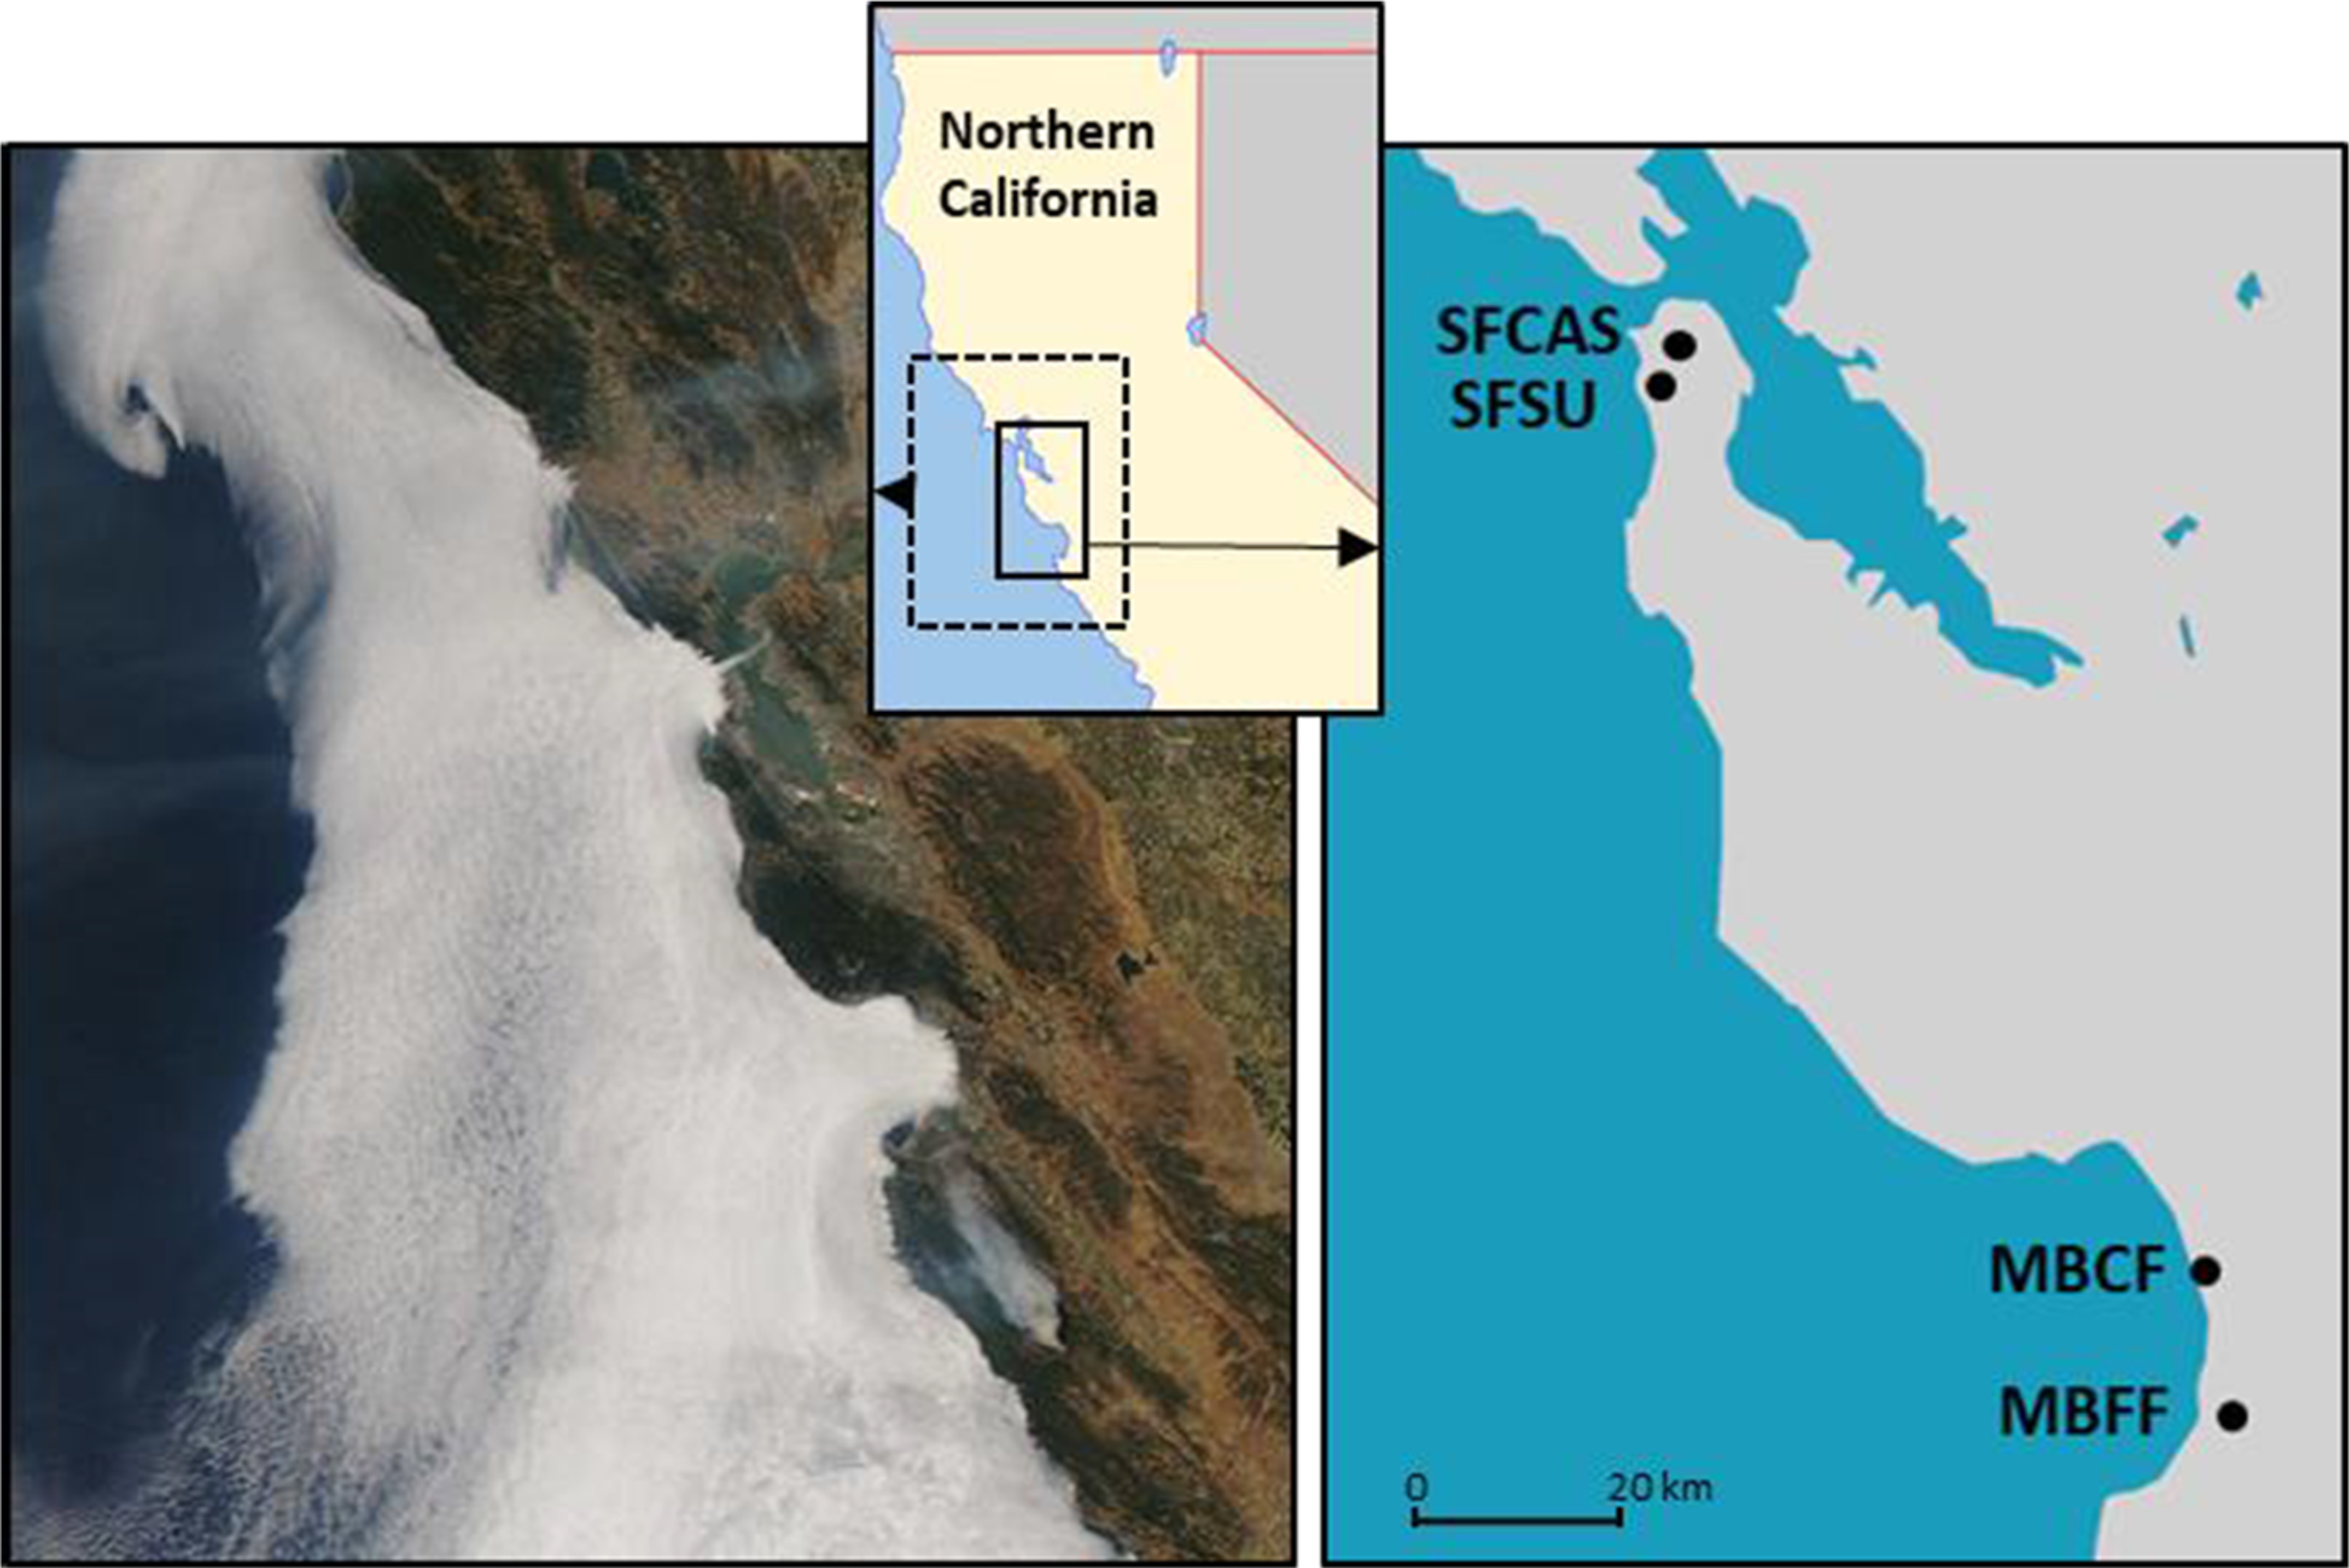 Satellite image (left) showing typical summer LCF along the central Californian coast (image captured July 2008, source NOAA), site map (right) showing location of observation sites in San Francisco (SF) and Monterey Bay (MB) and location map (inset) of central and northern California